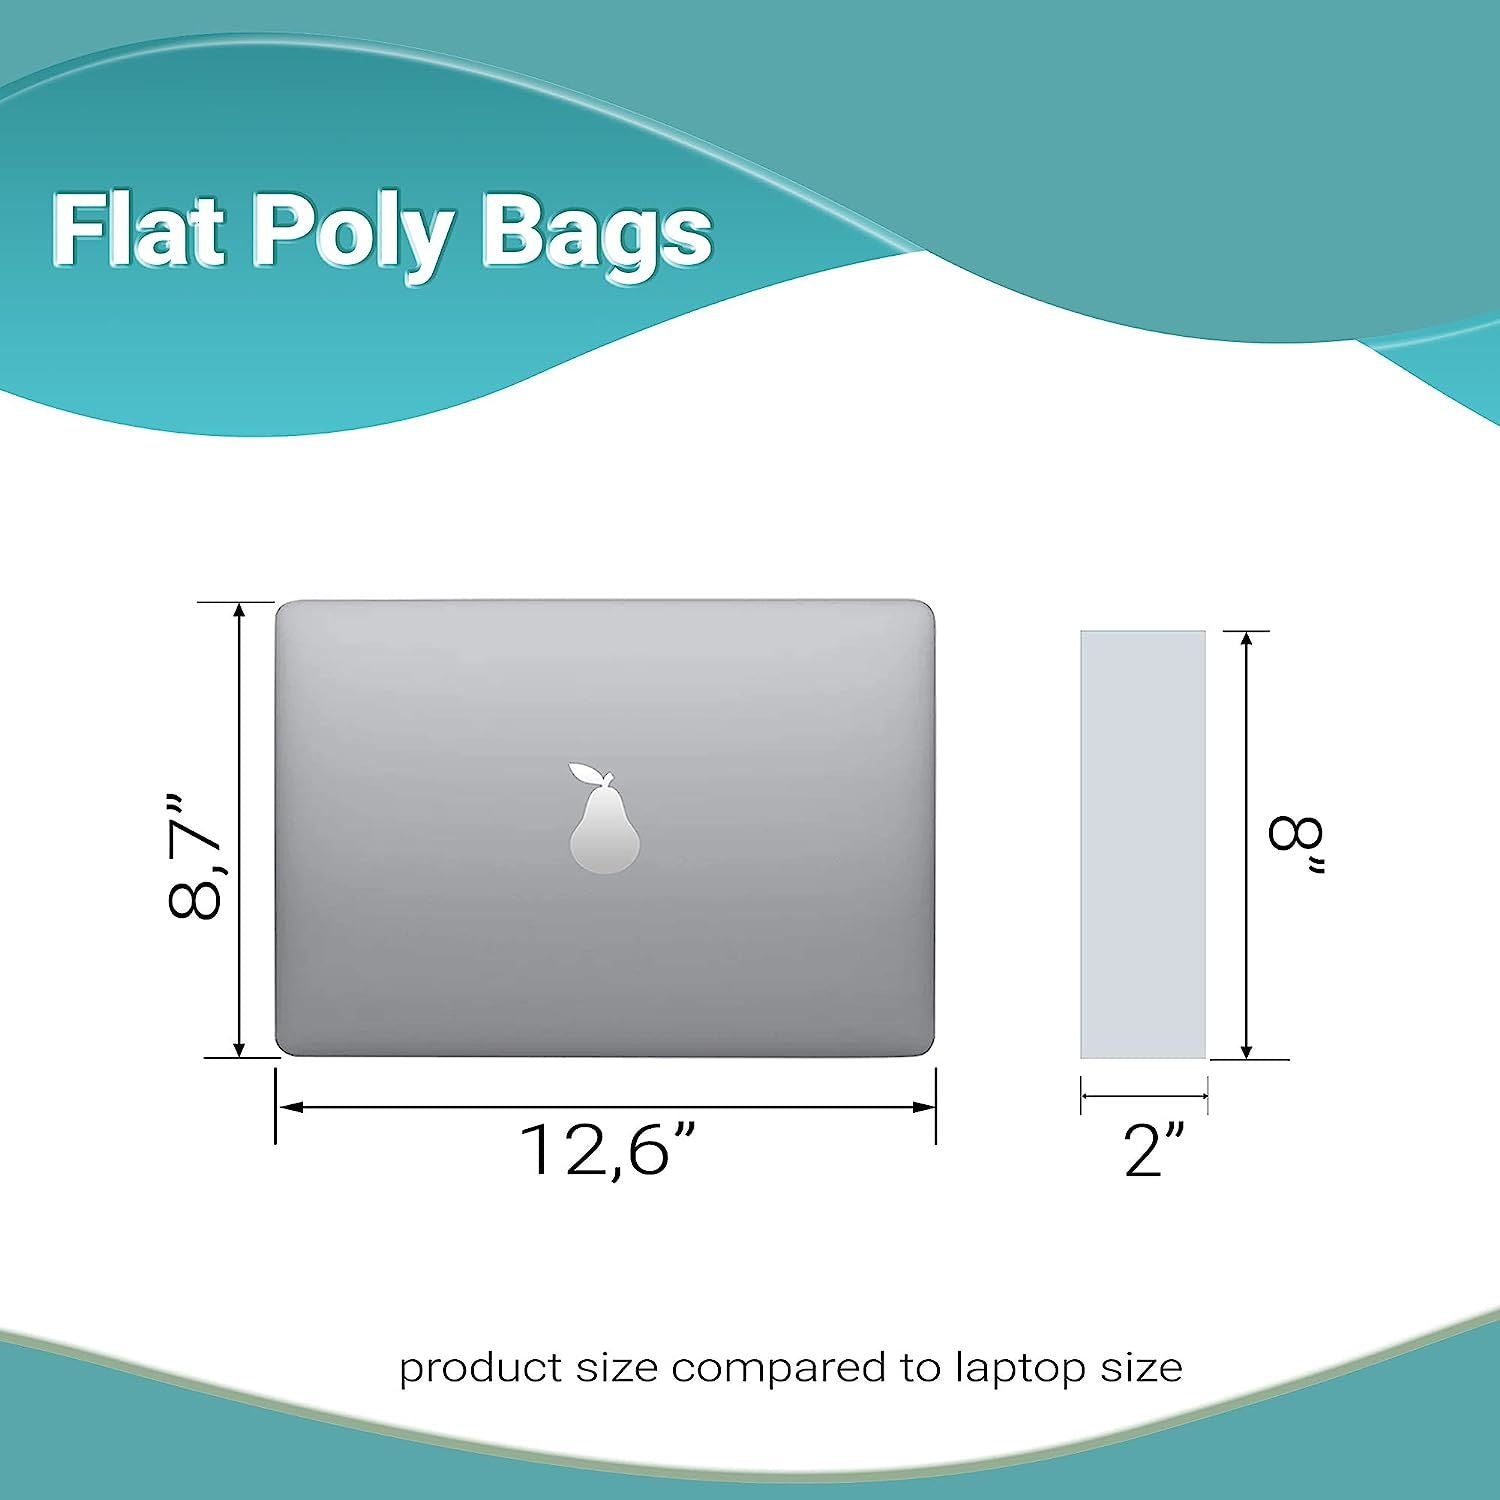 Pack of 1000 Flat Poly Bags 2 x 8. Clear Polyethylene Bags 2x8. Thickness 1.25 mil. Open Top Plastic Bags for Storing and Transporting. Ideal for Industrial; Food Service and Health Needs.